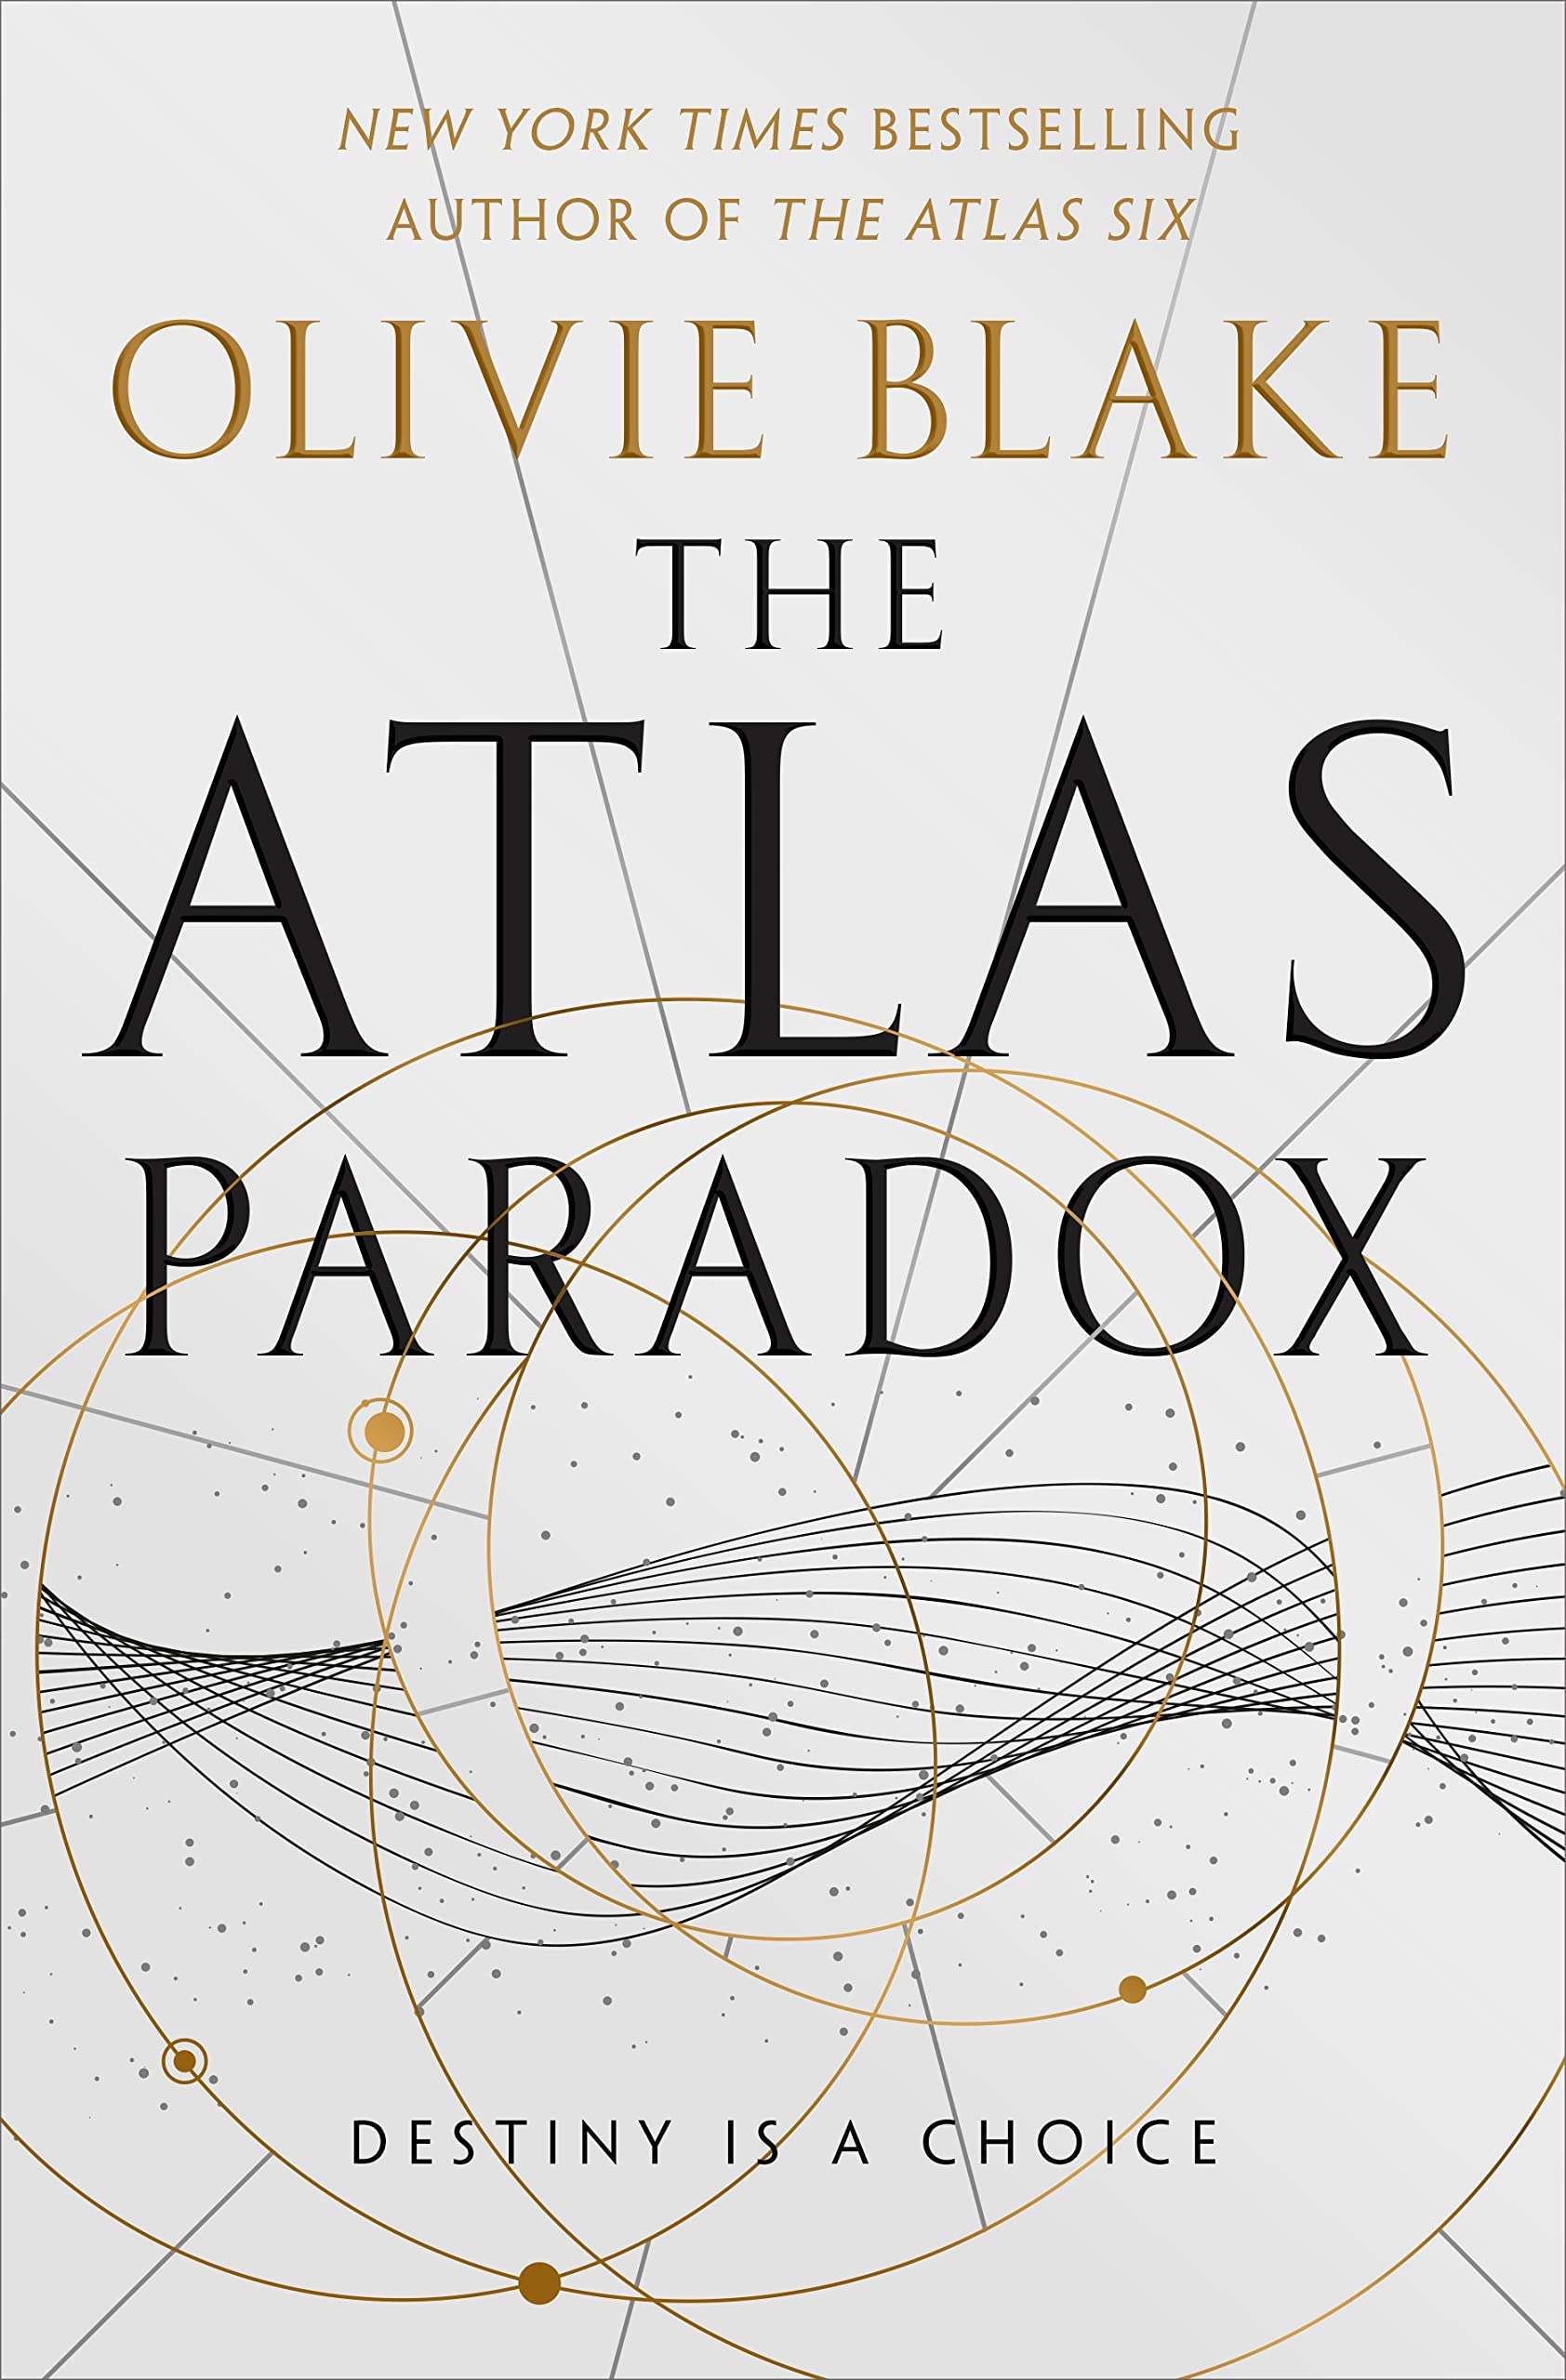 Image for "The Atlas Paradox"